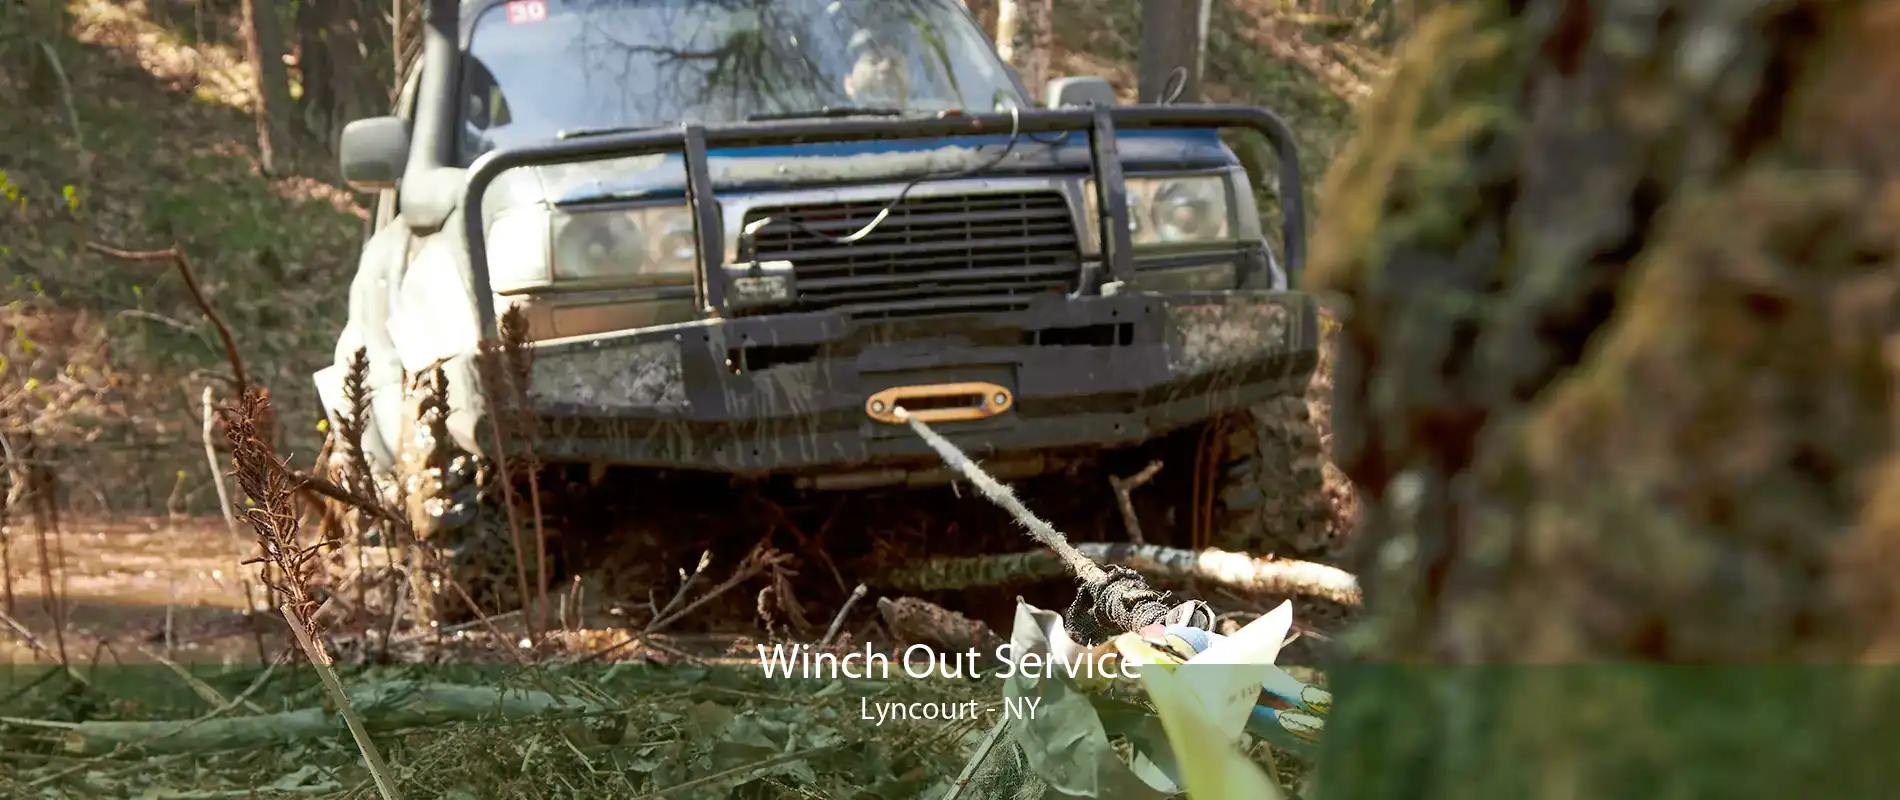 Winch Out Service Lyncourt - NY